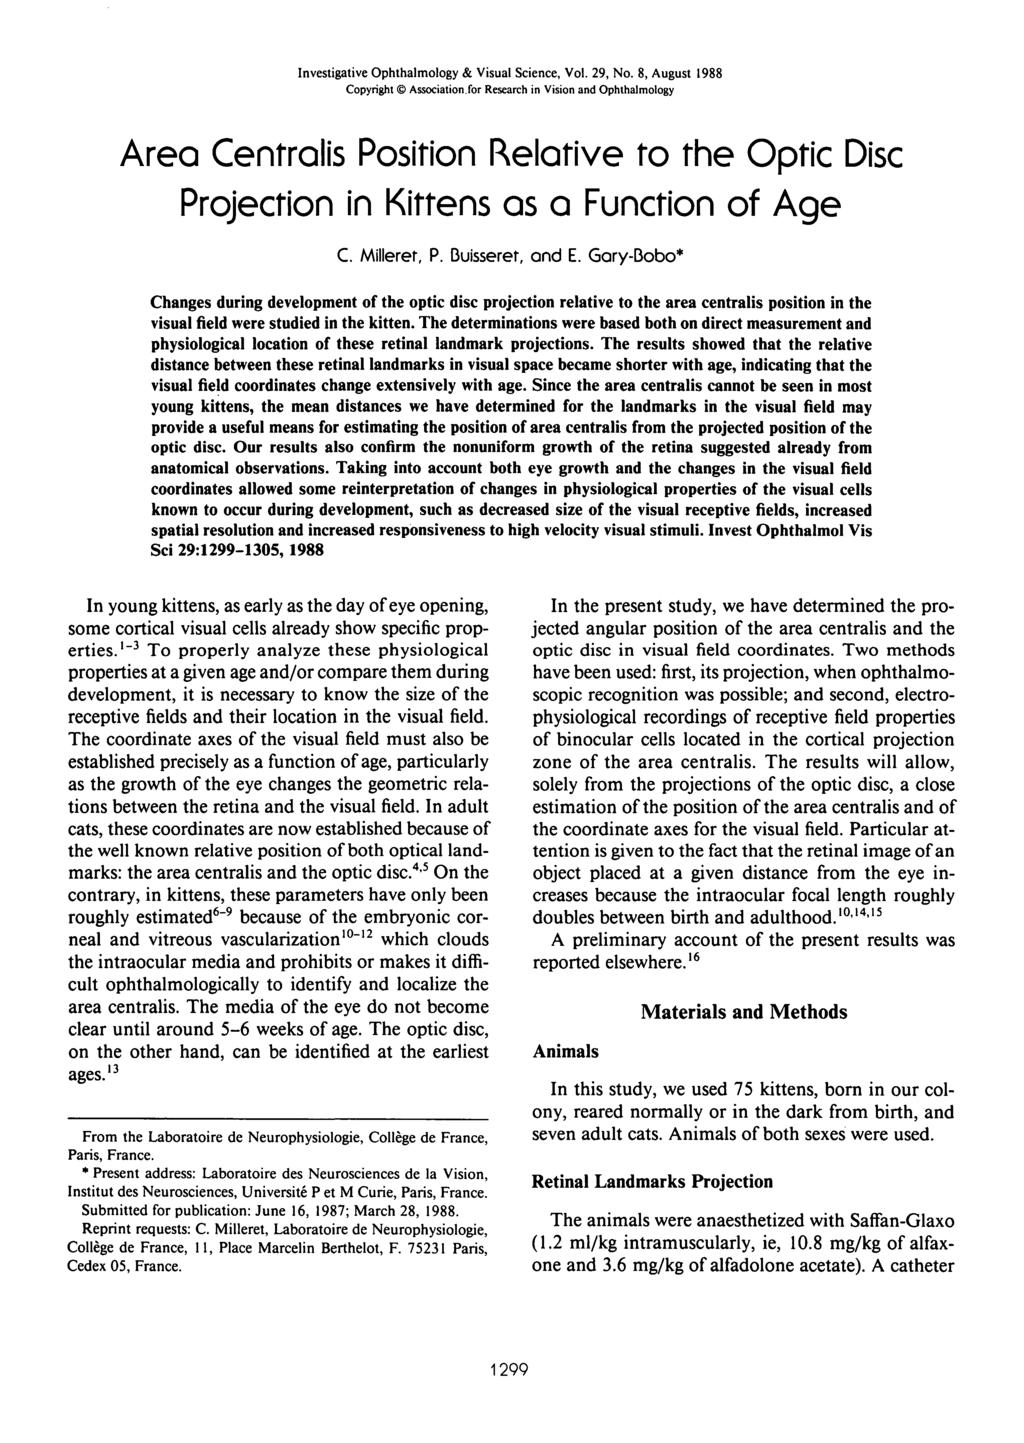 Investigative Ophthalmology & Visual Science, Vol. 29, No. 8, August 1988 Copyright Association.